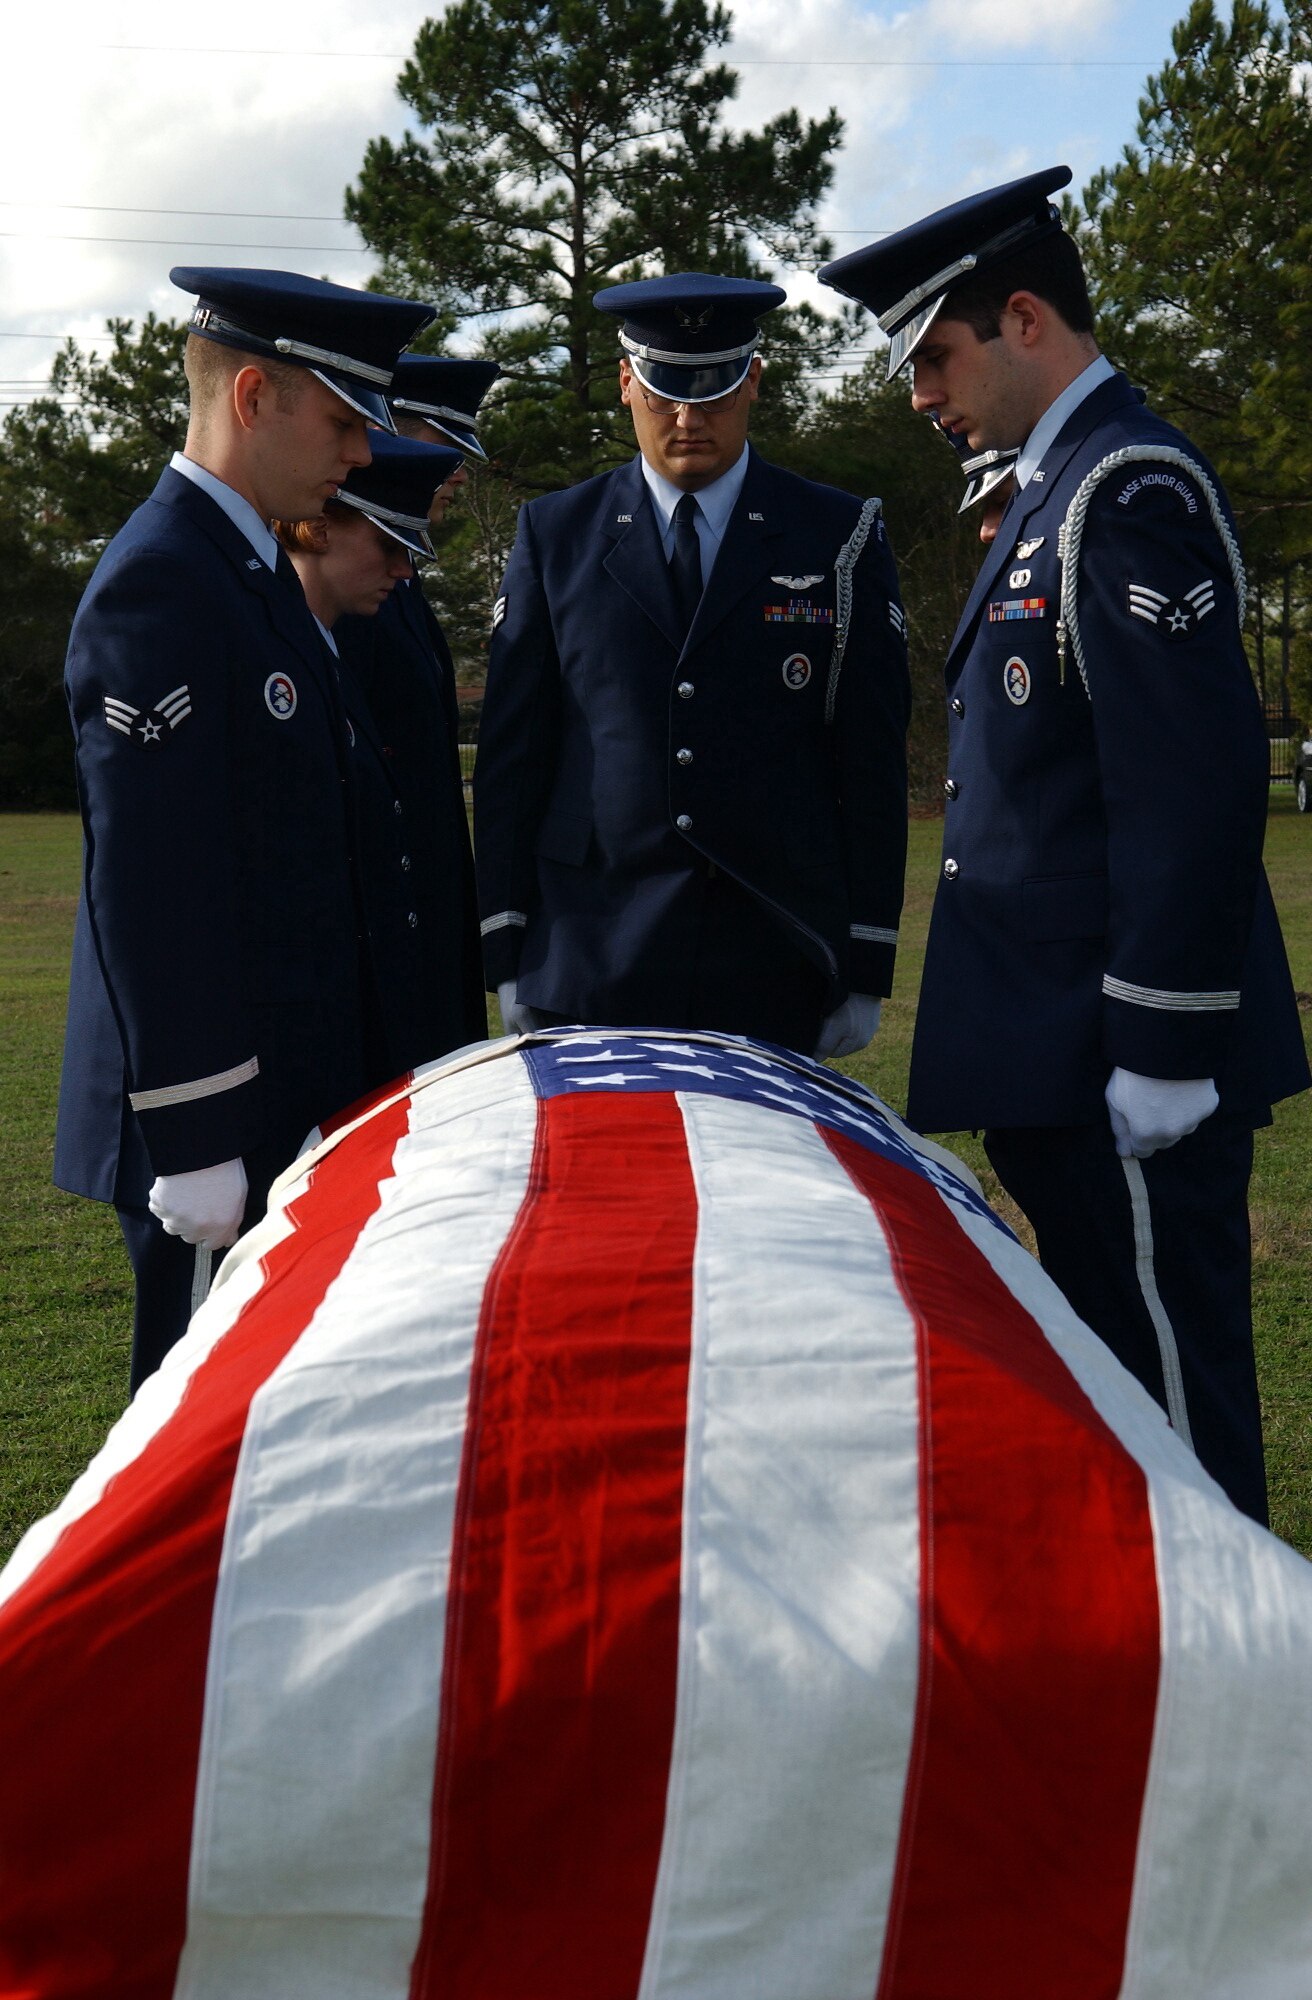 MOODY AIR FORCE BASE, Ga. - The Knights of Honor stand in quiet reverence before a flag-draped coffin Jan. 29 during a mock funeral here. During a real funeral, they would be posted behind the hurst preparing to pull the coffin out of the vehicle.  One person pulls the coffin out and walks backward with the coffin as the other five people grab the coffin and prepare to lift it off the hurst. 
(USAF Photo by SrA Angelita Collins)
                          